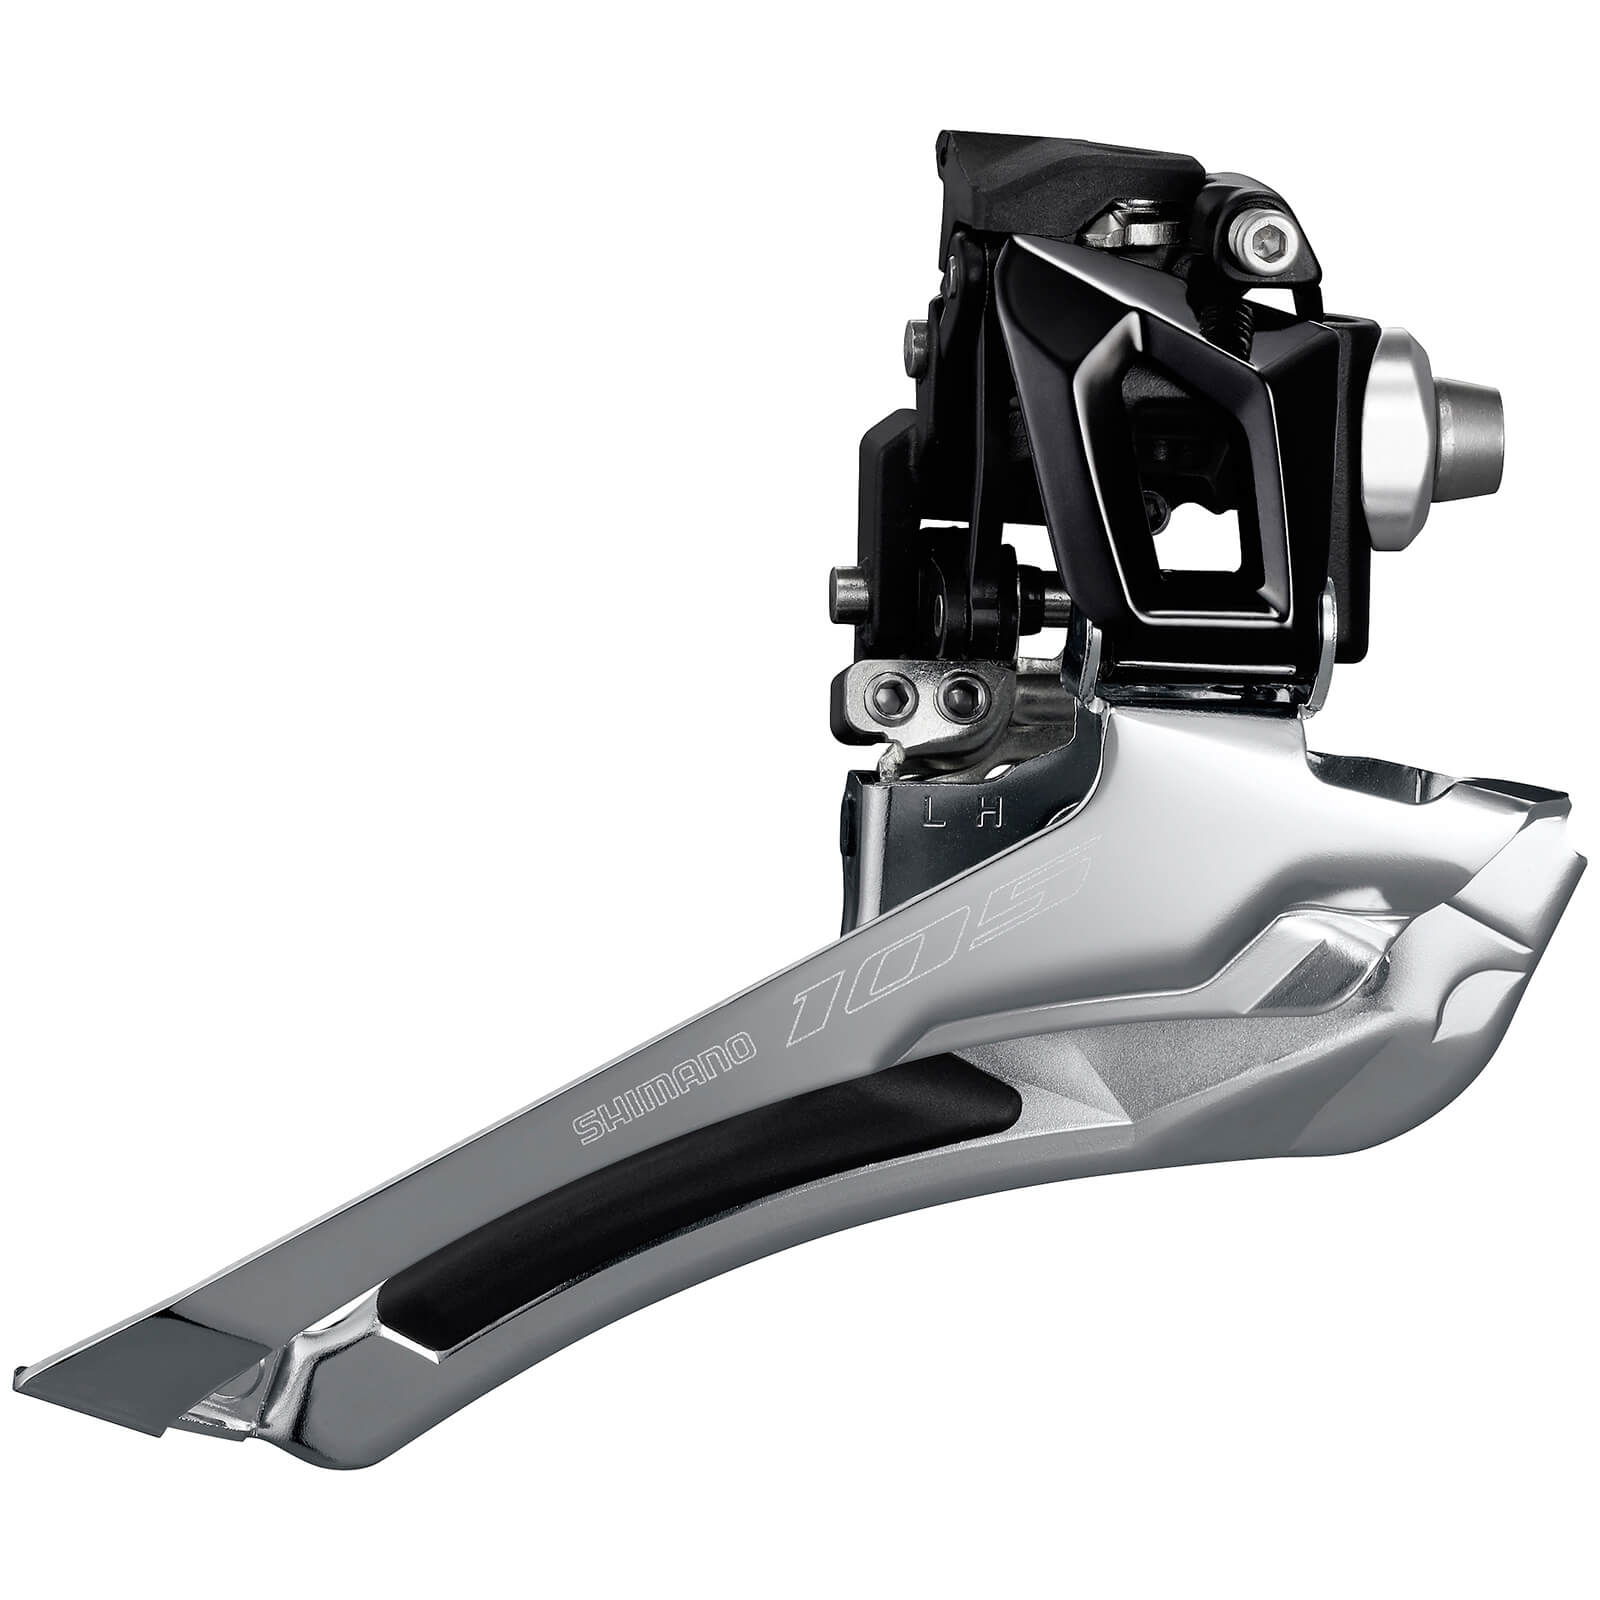 Shimano 105 R7000 Band-On Front Derailleur - One Size - Braze on - Black